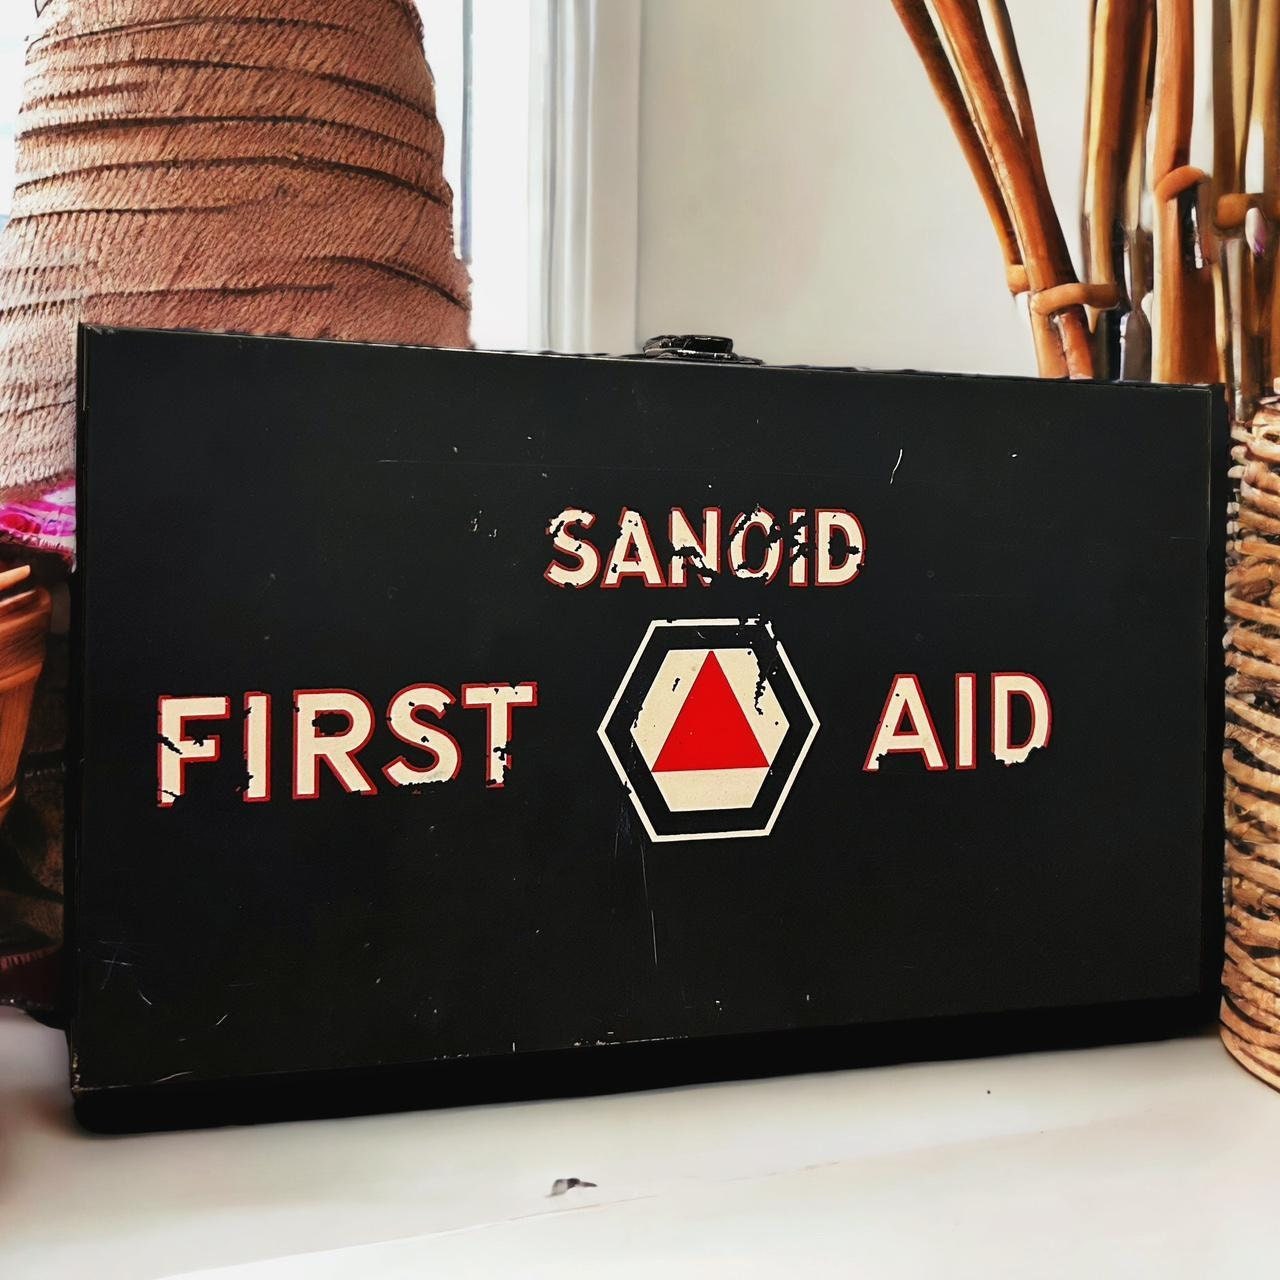 First Aid Kit, Johnson & Johnson Auto-travel, 1970's Metal Band Aid Box,  Gauze, Band Aids and More, Collectible Memorabilia 